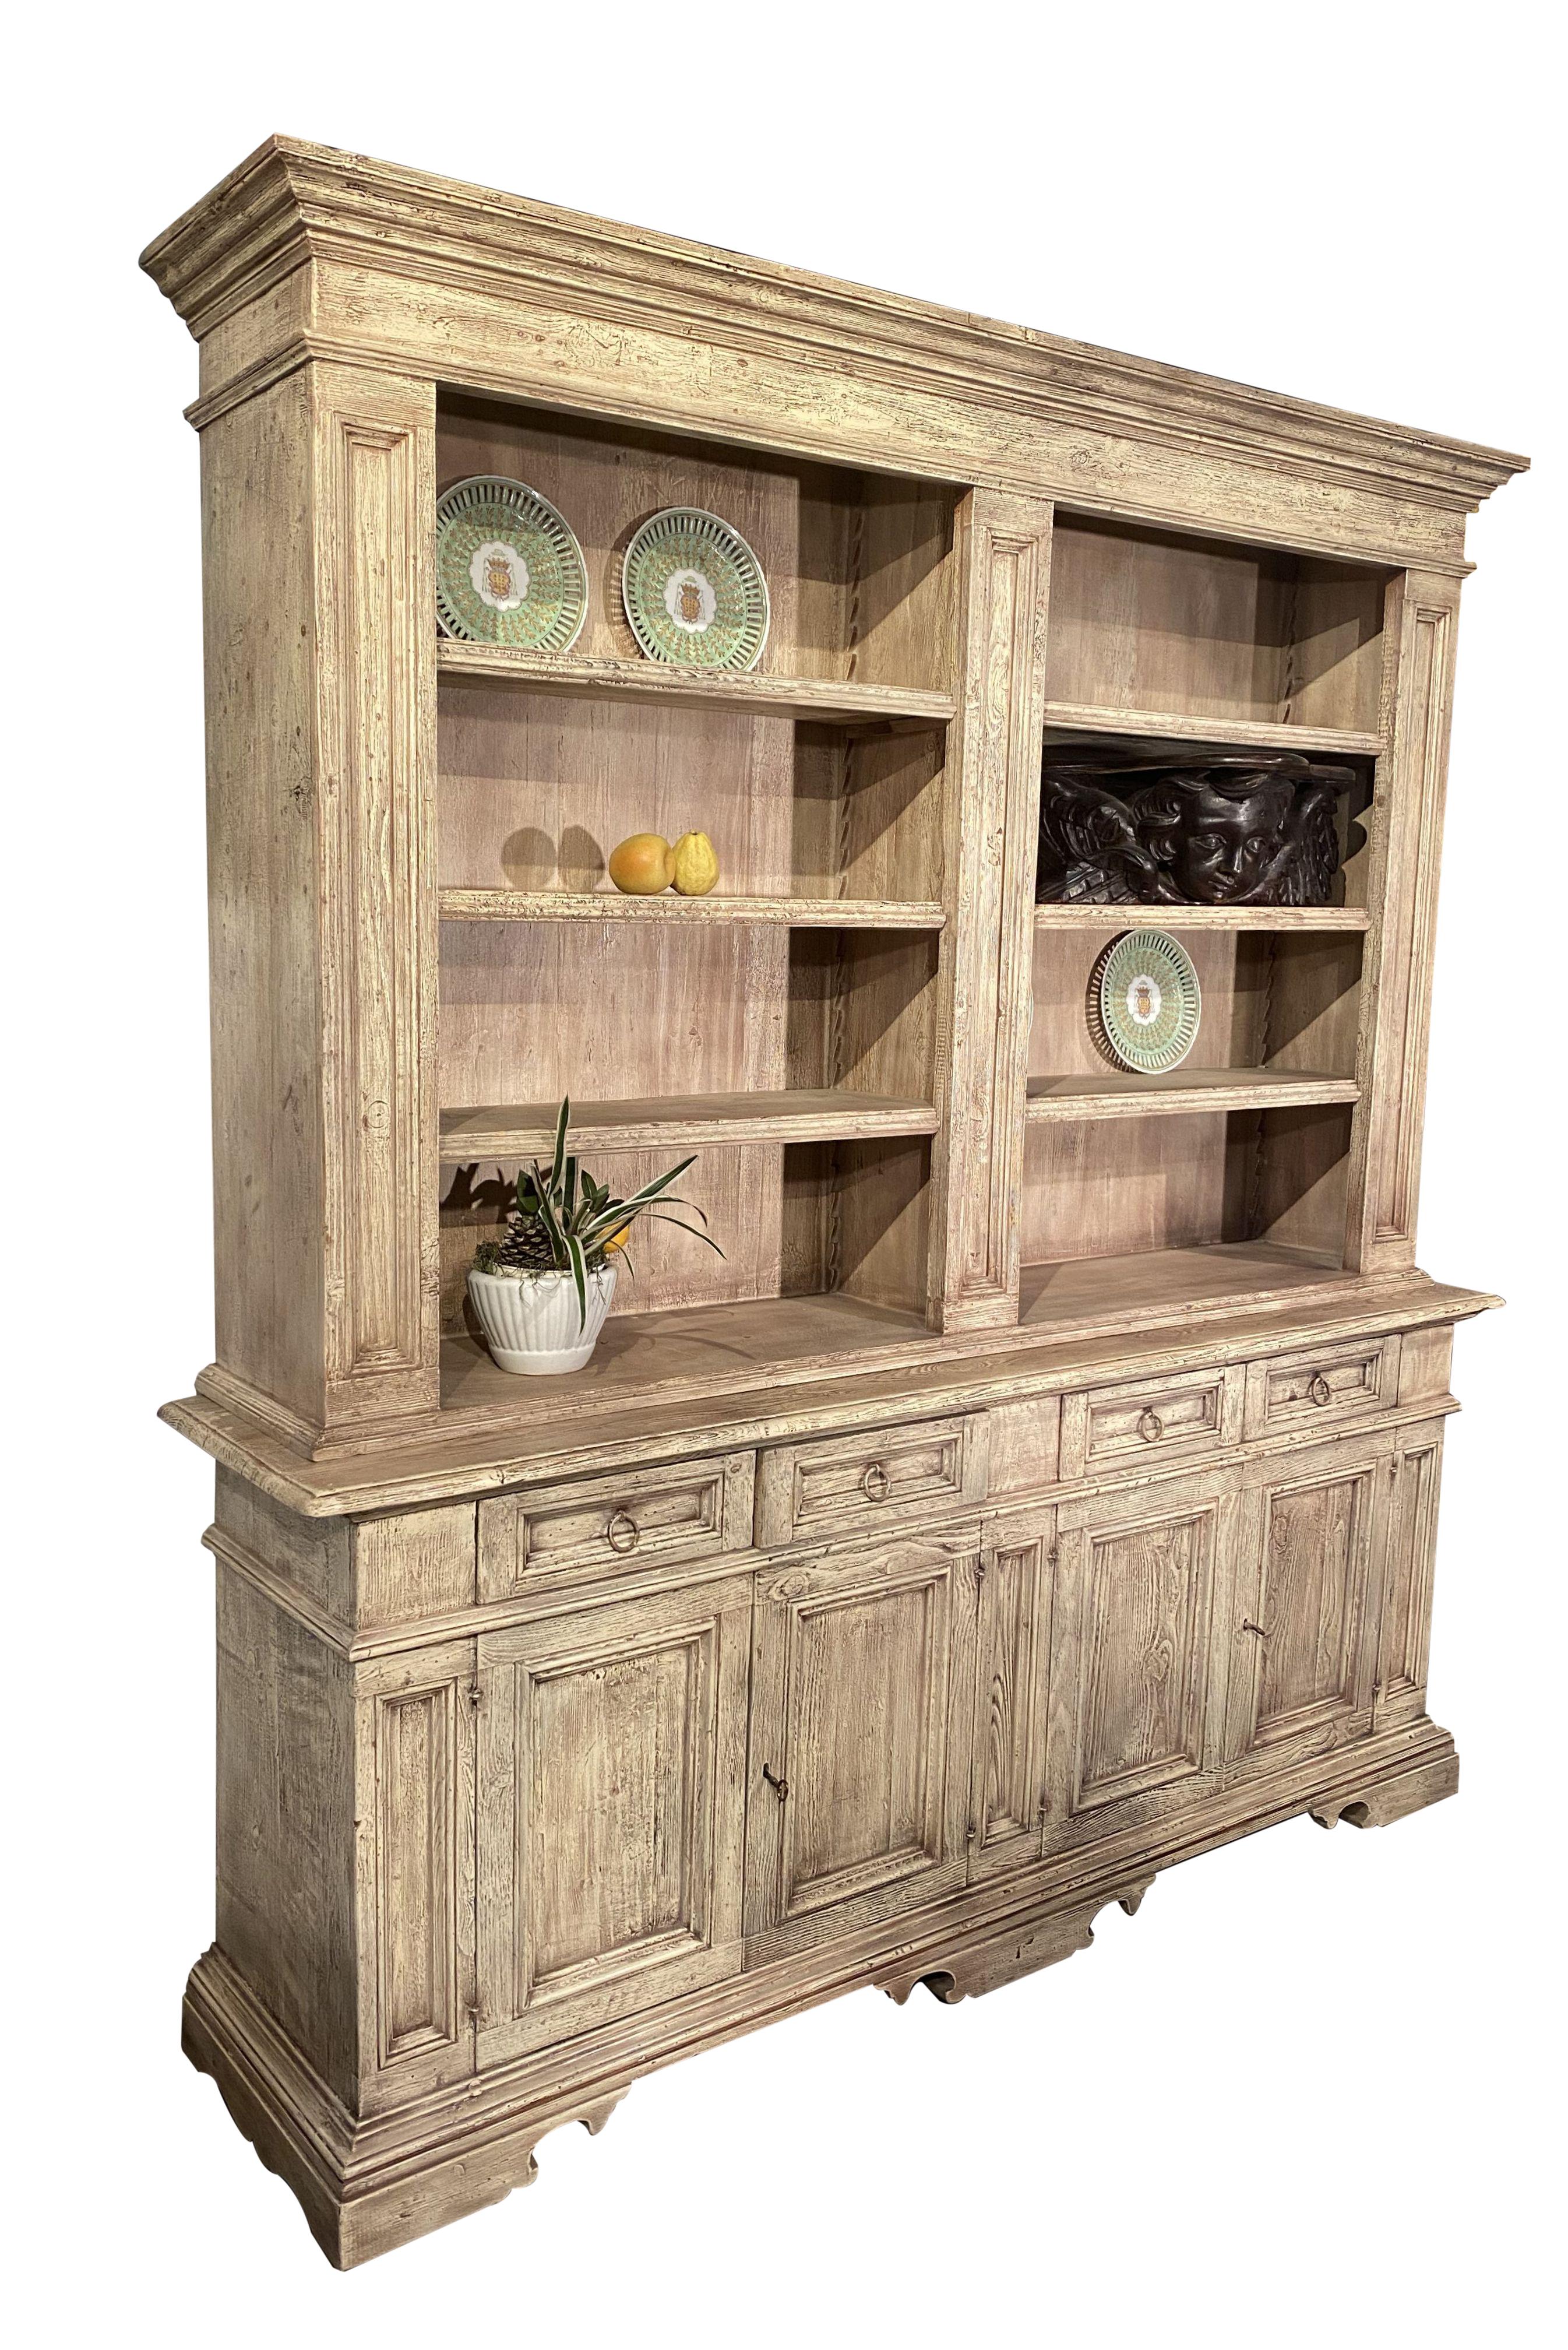 Our new Cortina Library features rustic Old Fir with a unique patinated antique beige finish. Available to order in a variety of wood species and finish colors, and in custom size and configuration by quote - just inquire.

USA In-Stock as